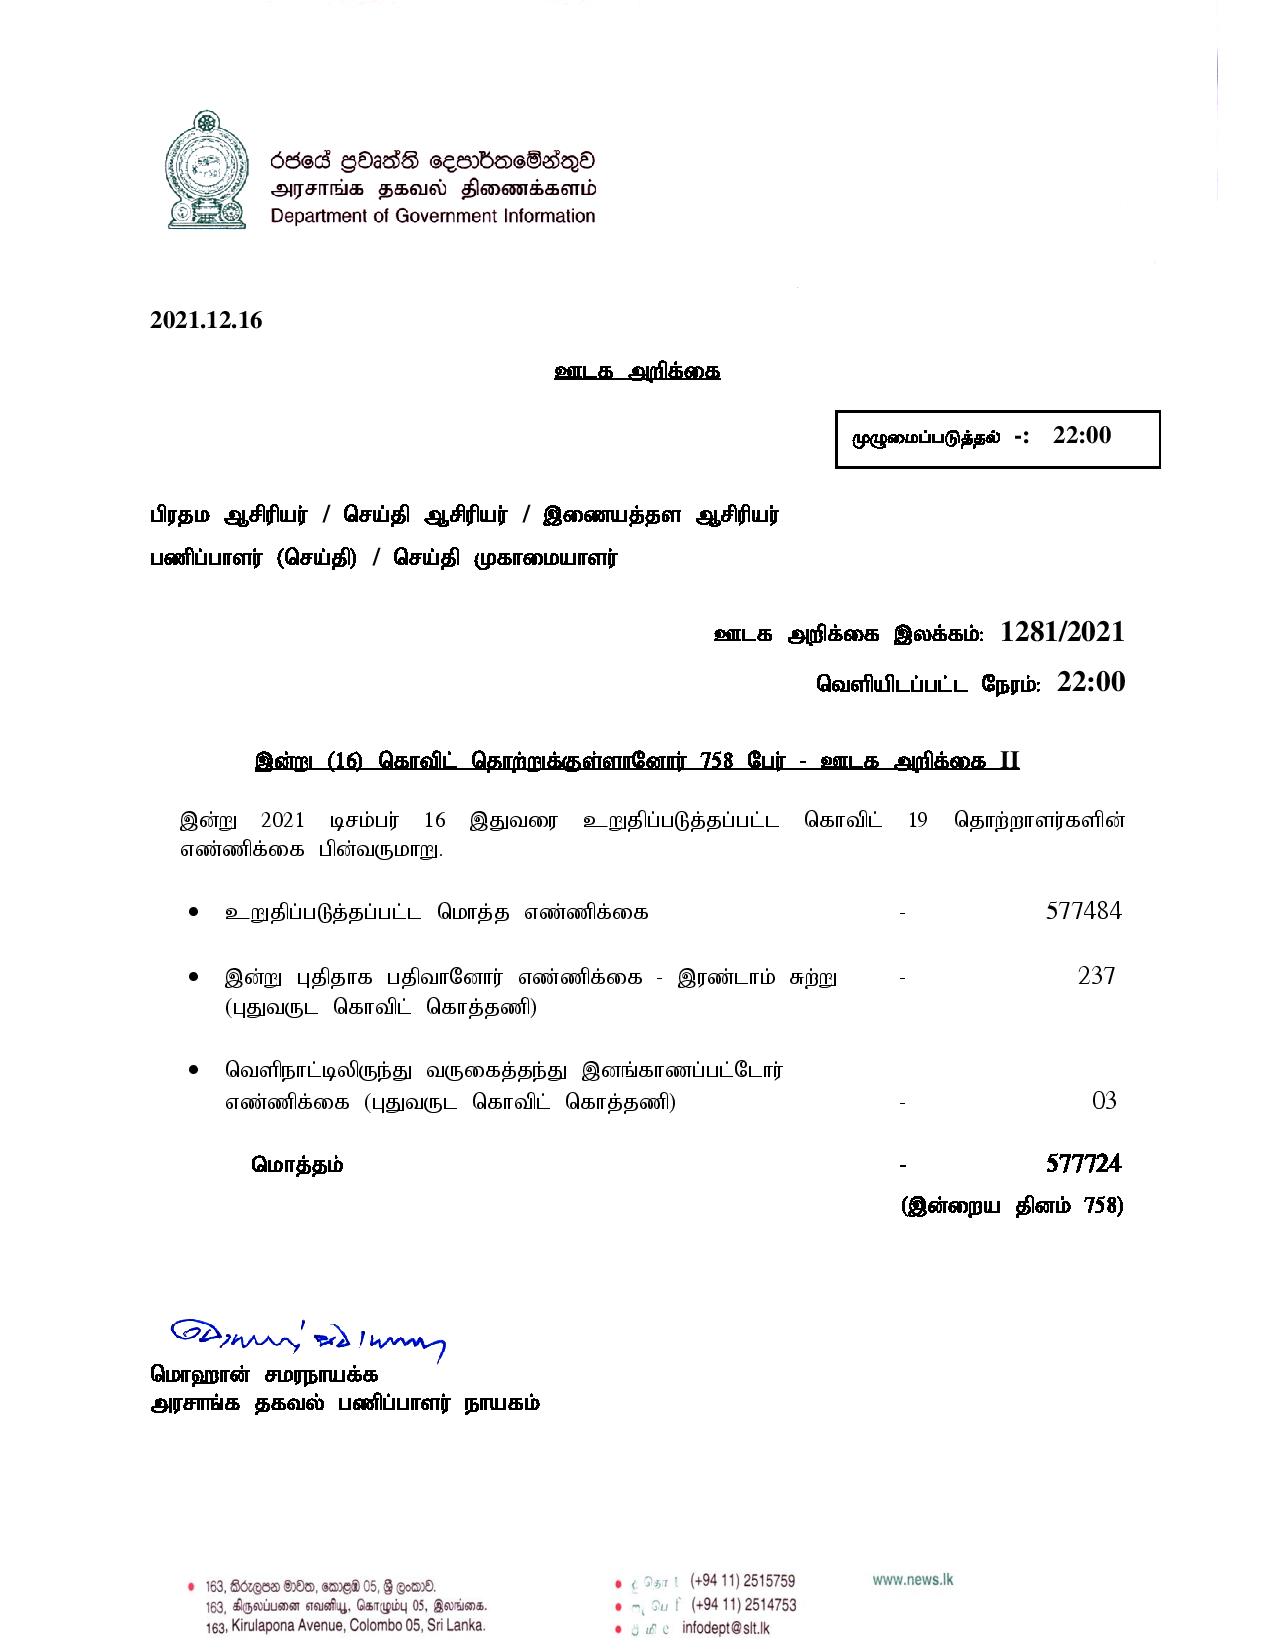 Press Release 1281 Tamil page 001